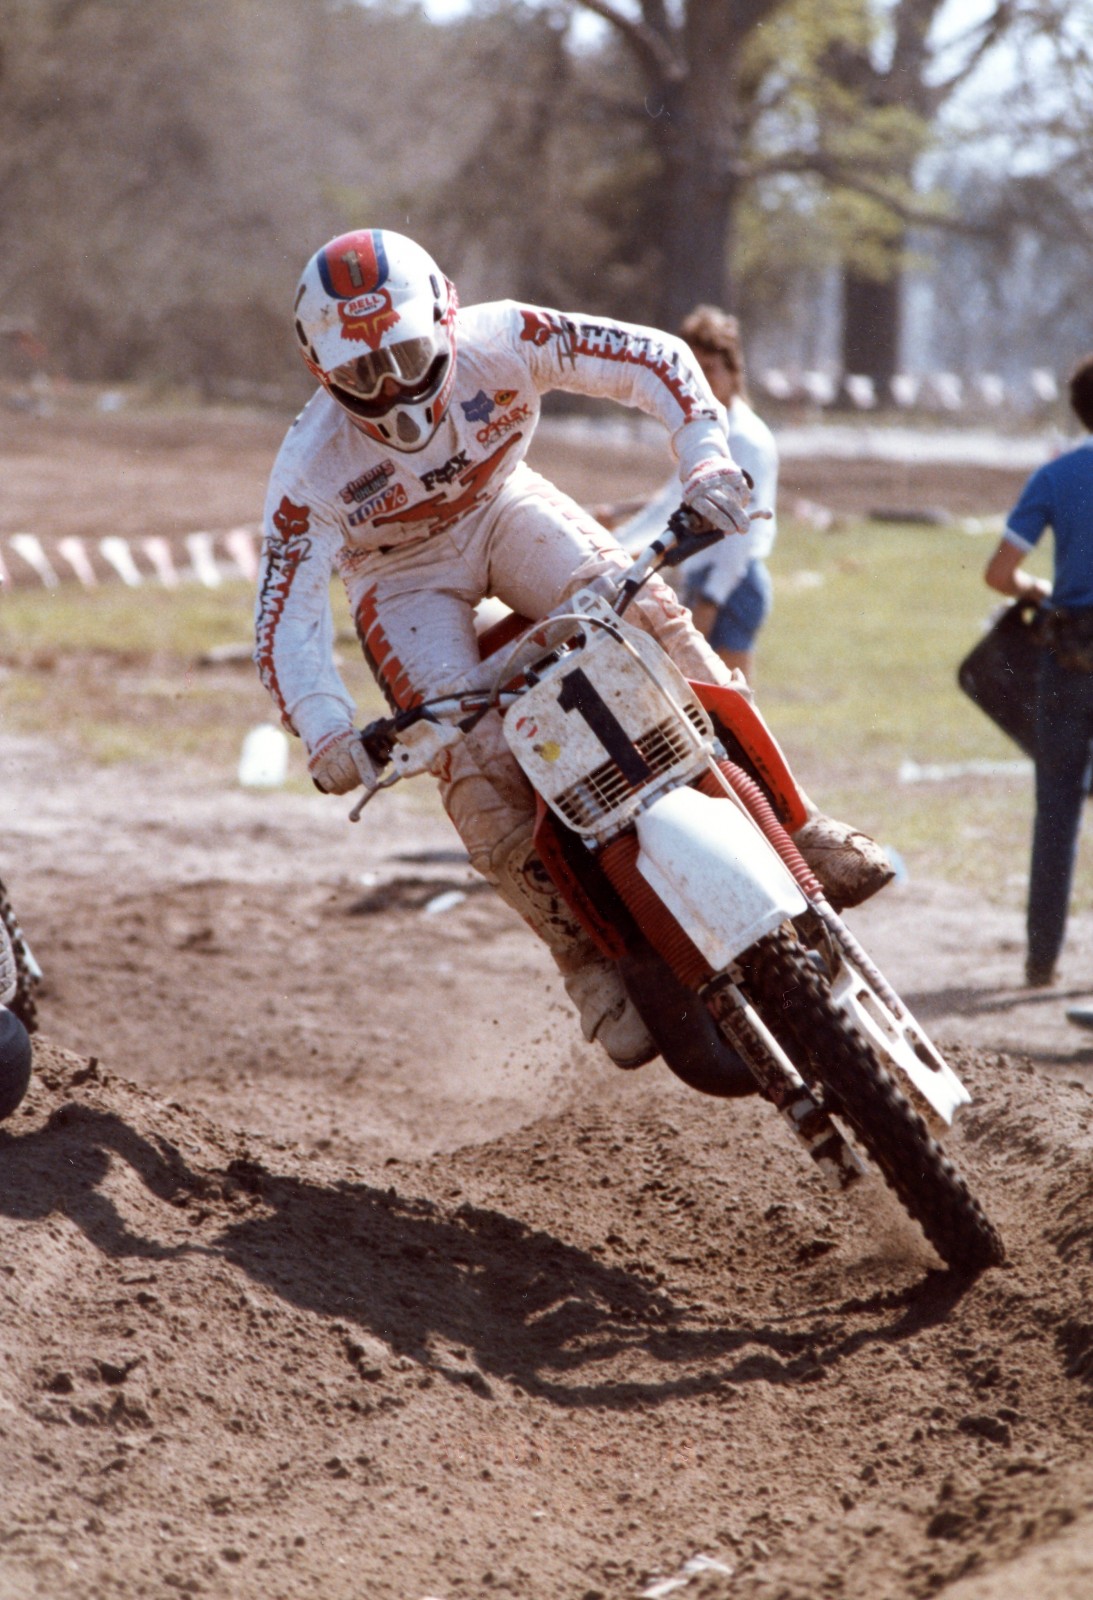 who was the first professional motocross racer